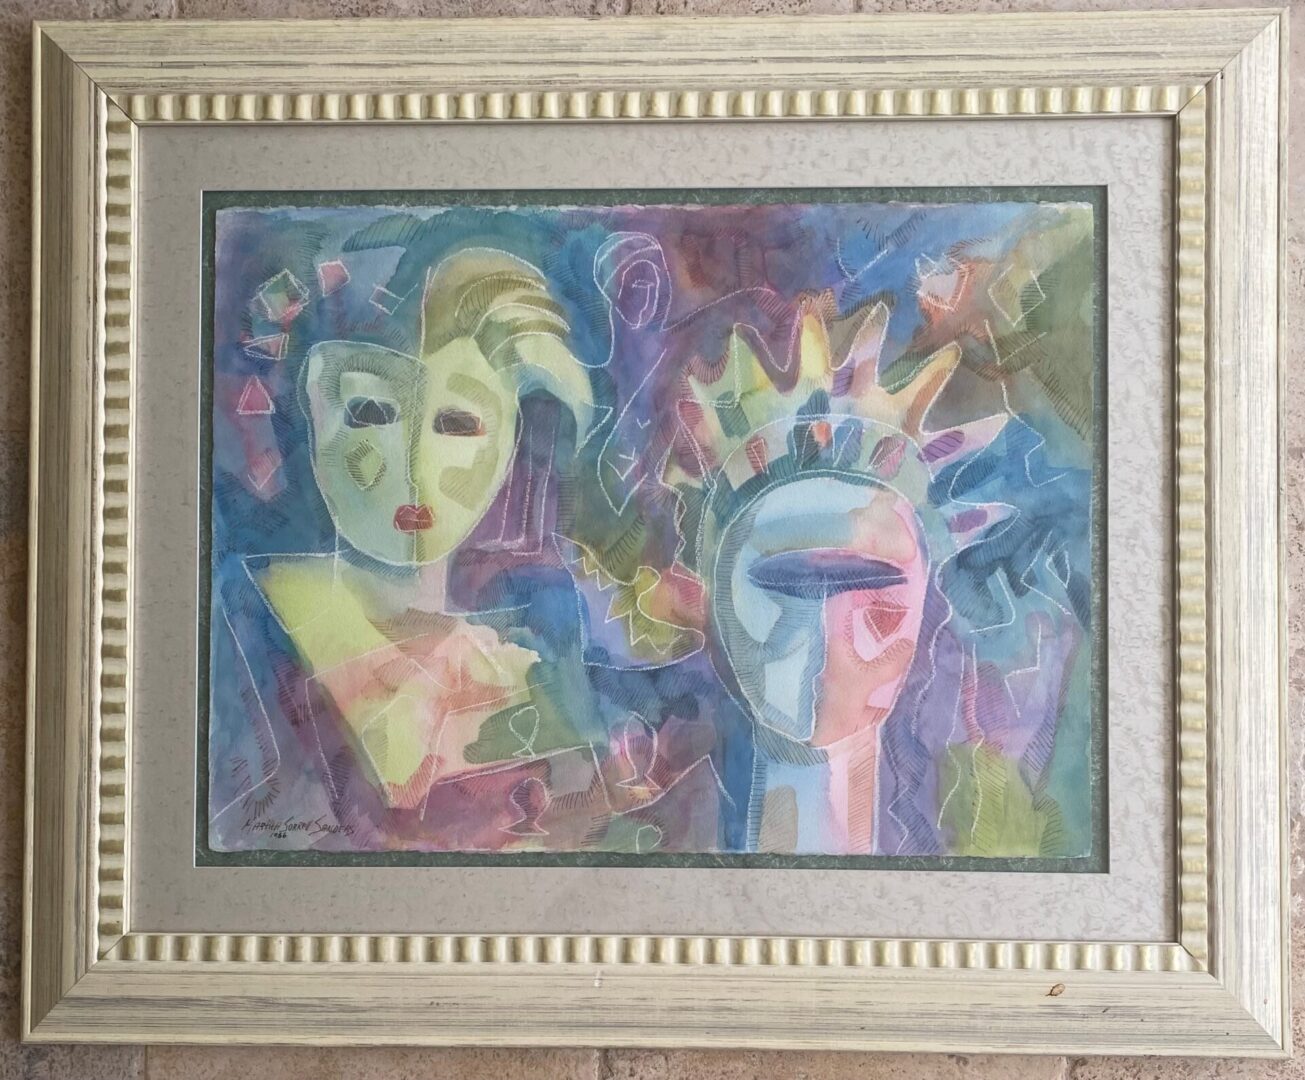 A painting of two faces in a frame